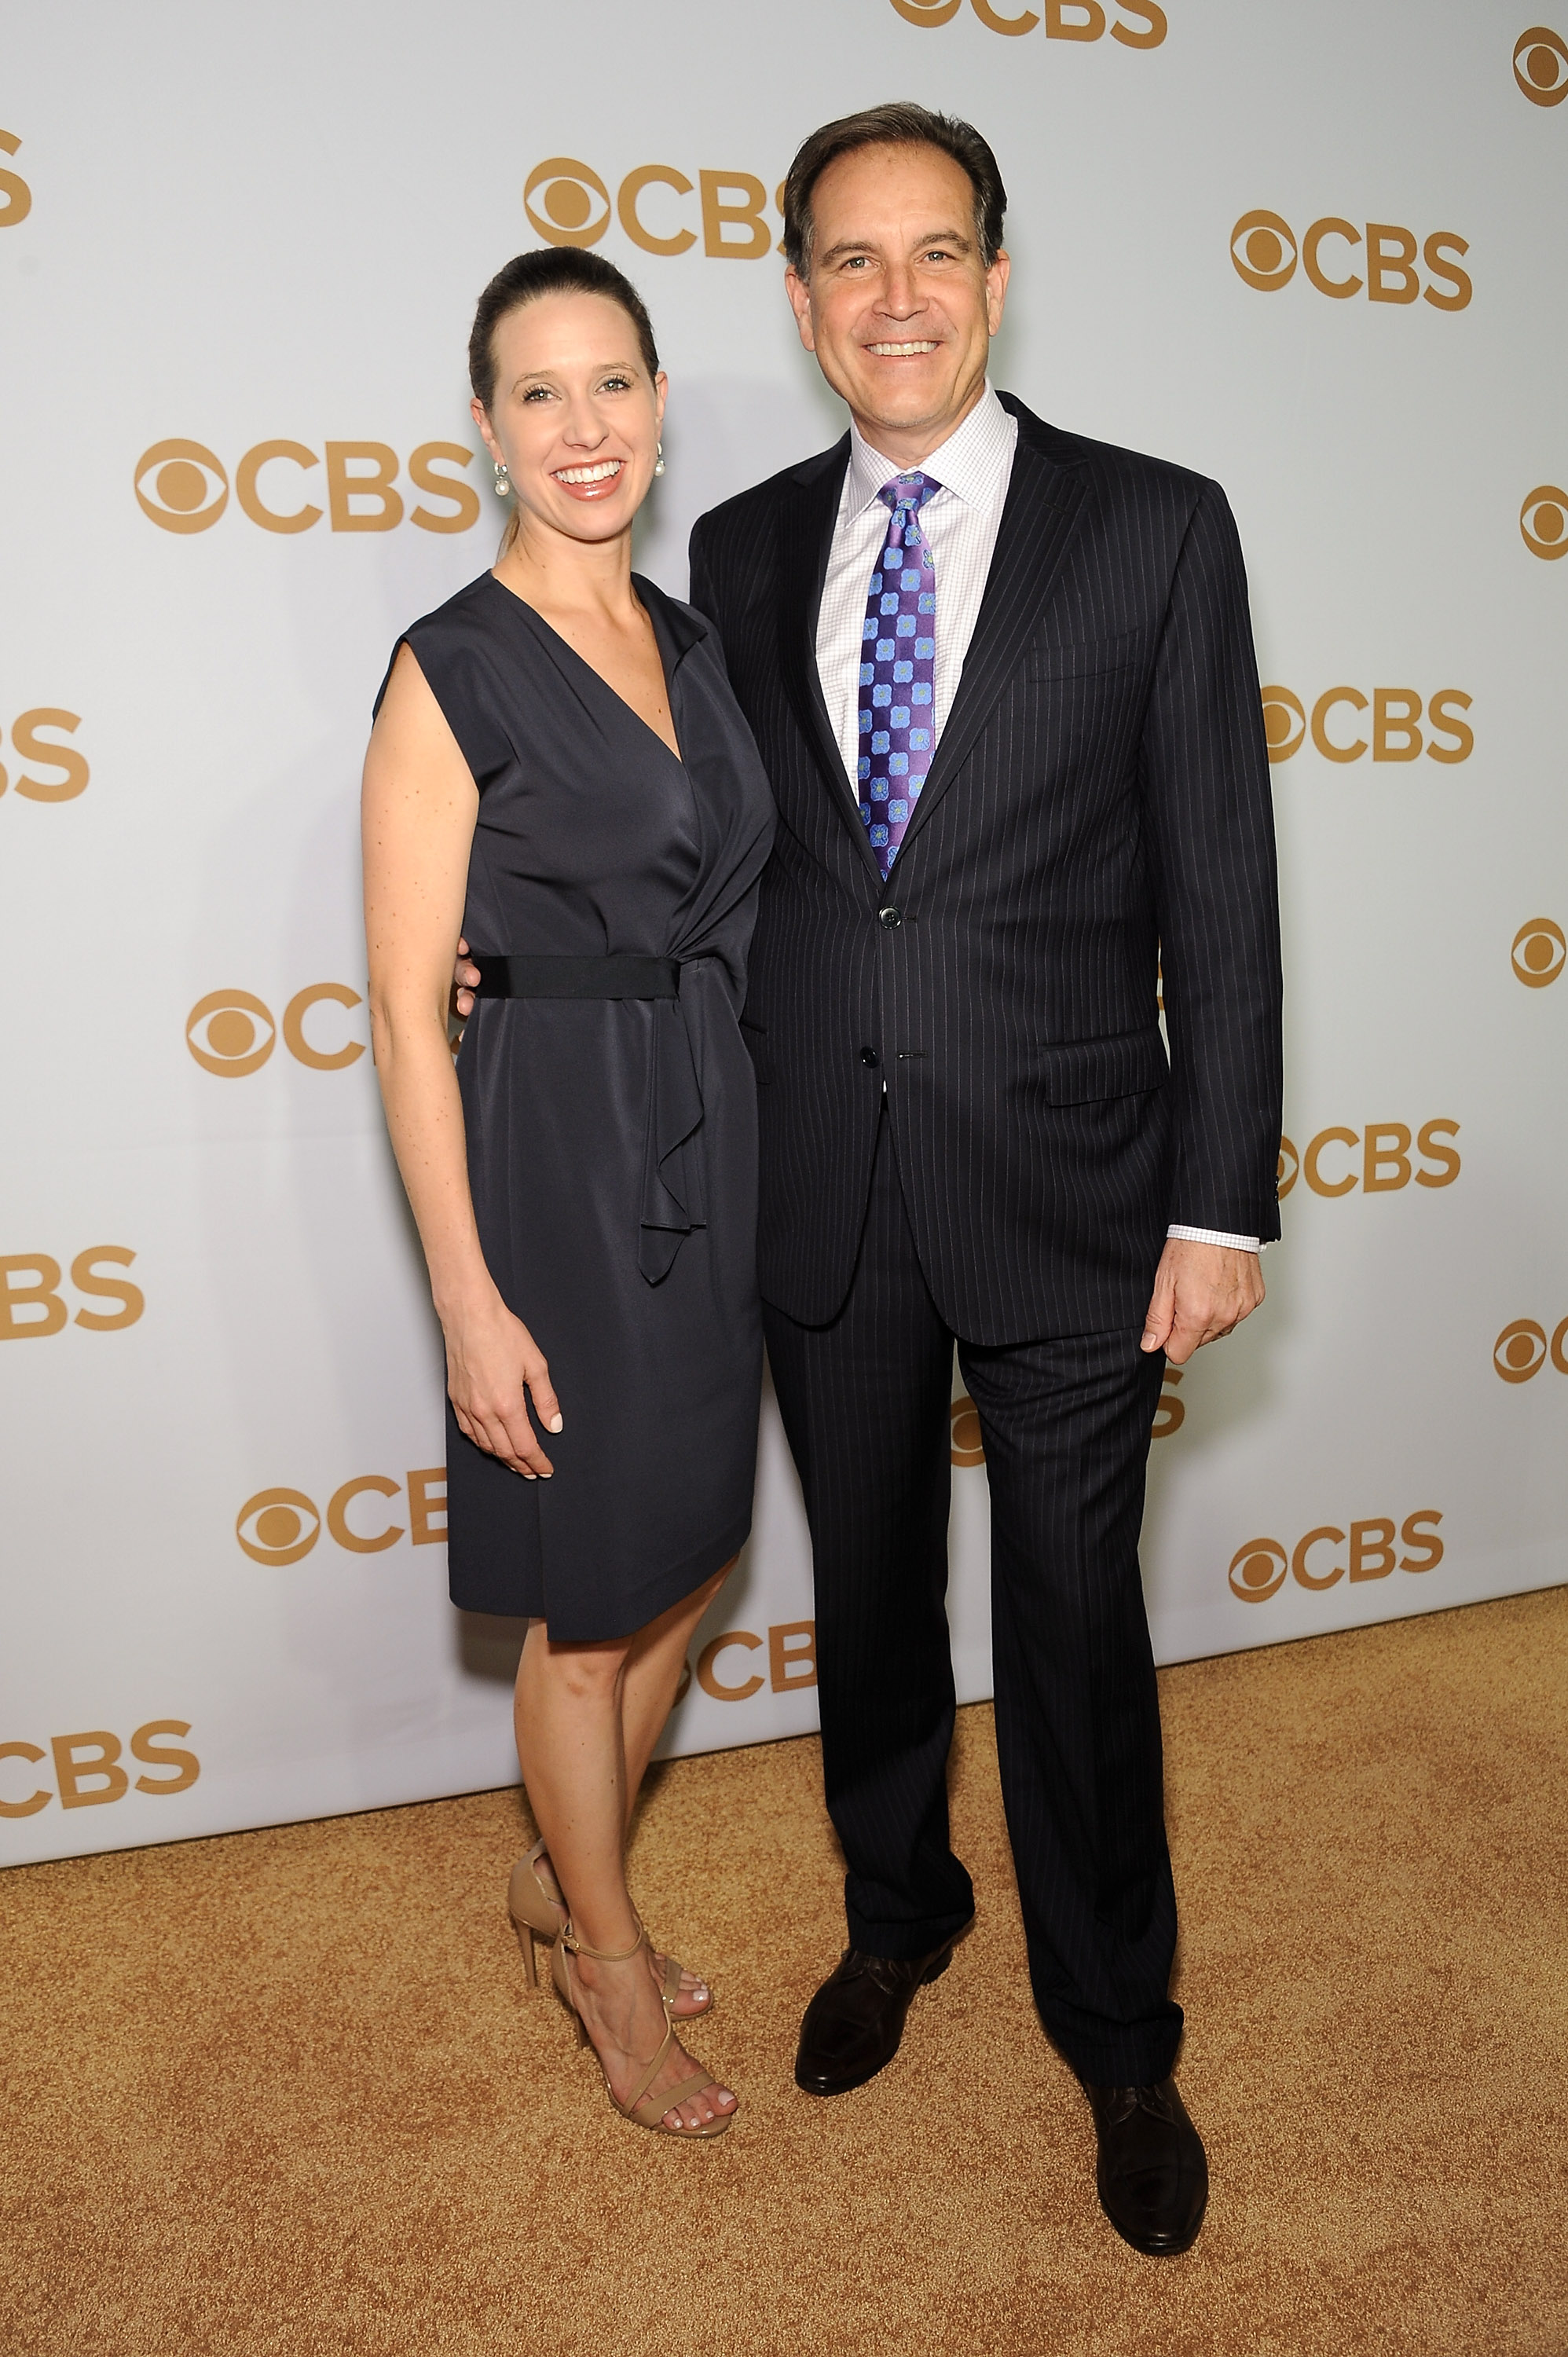 Jim Nantz and Courtney Nantz attend the 2015 CBS Upfront at The Tent at Lincoln Center on May 13, 2015, in New York City | Source: Getty Images